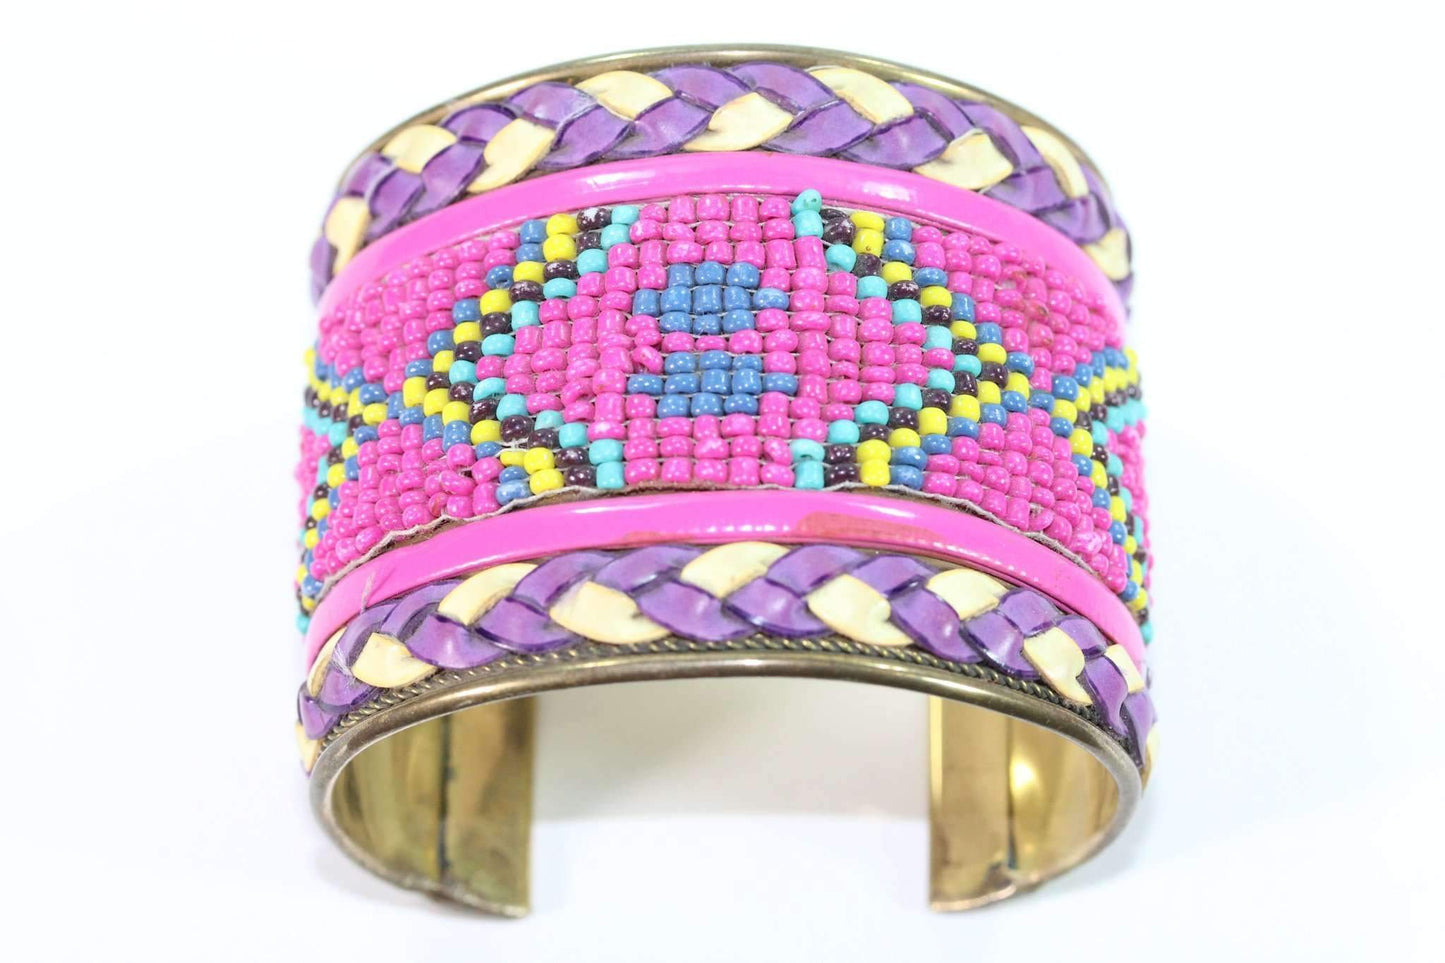 Beaded Cuff Bangles - Scarvesnthangs